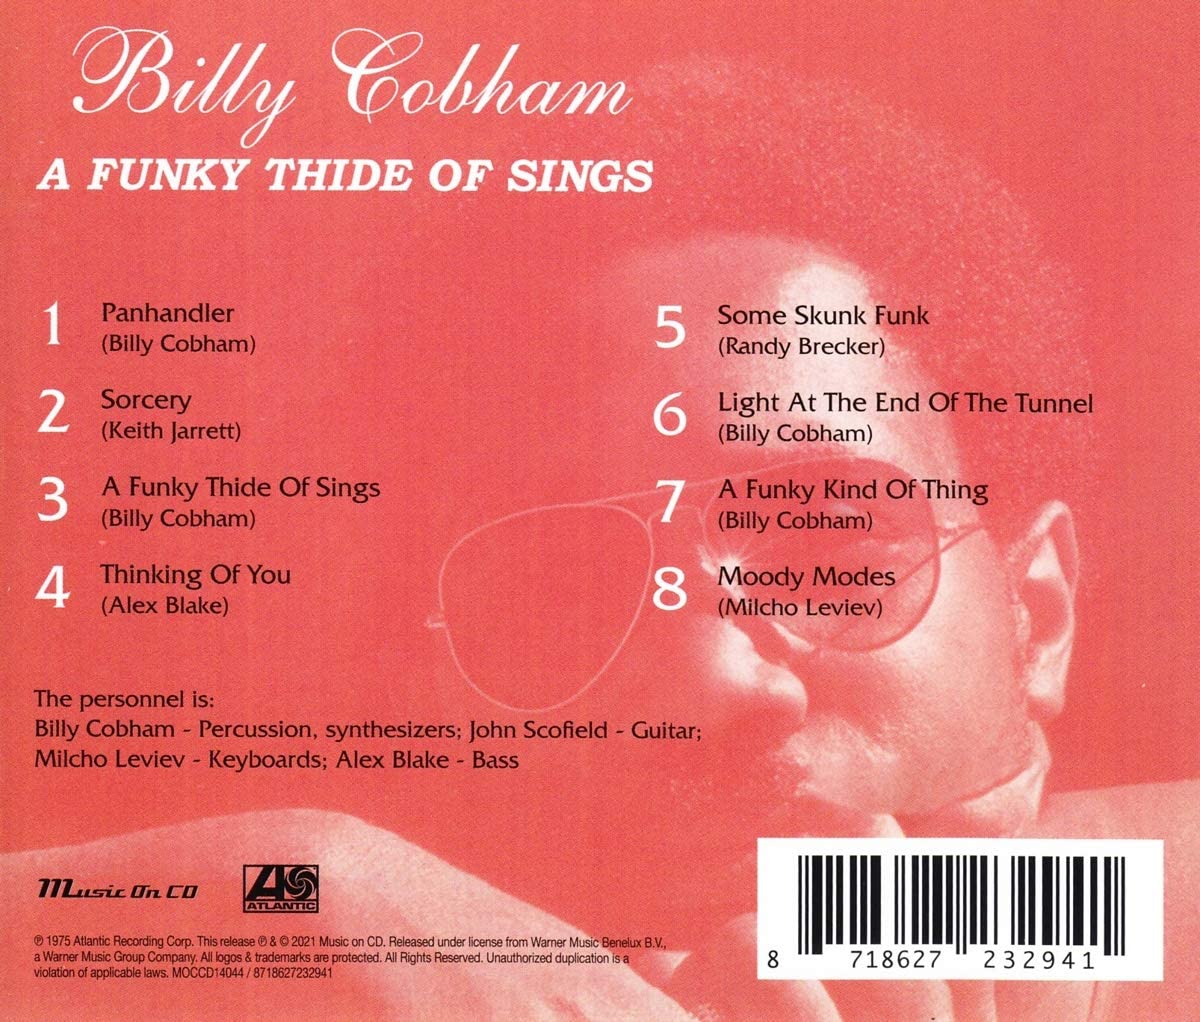 CD - Billy Cobham - A Funky Thide Of Sings